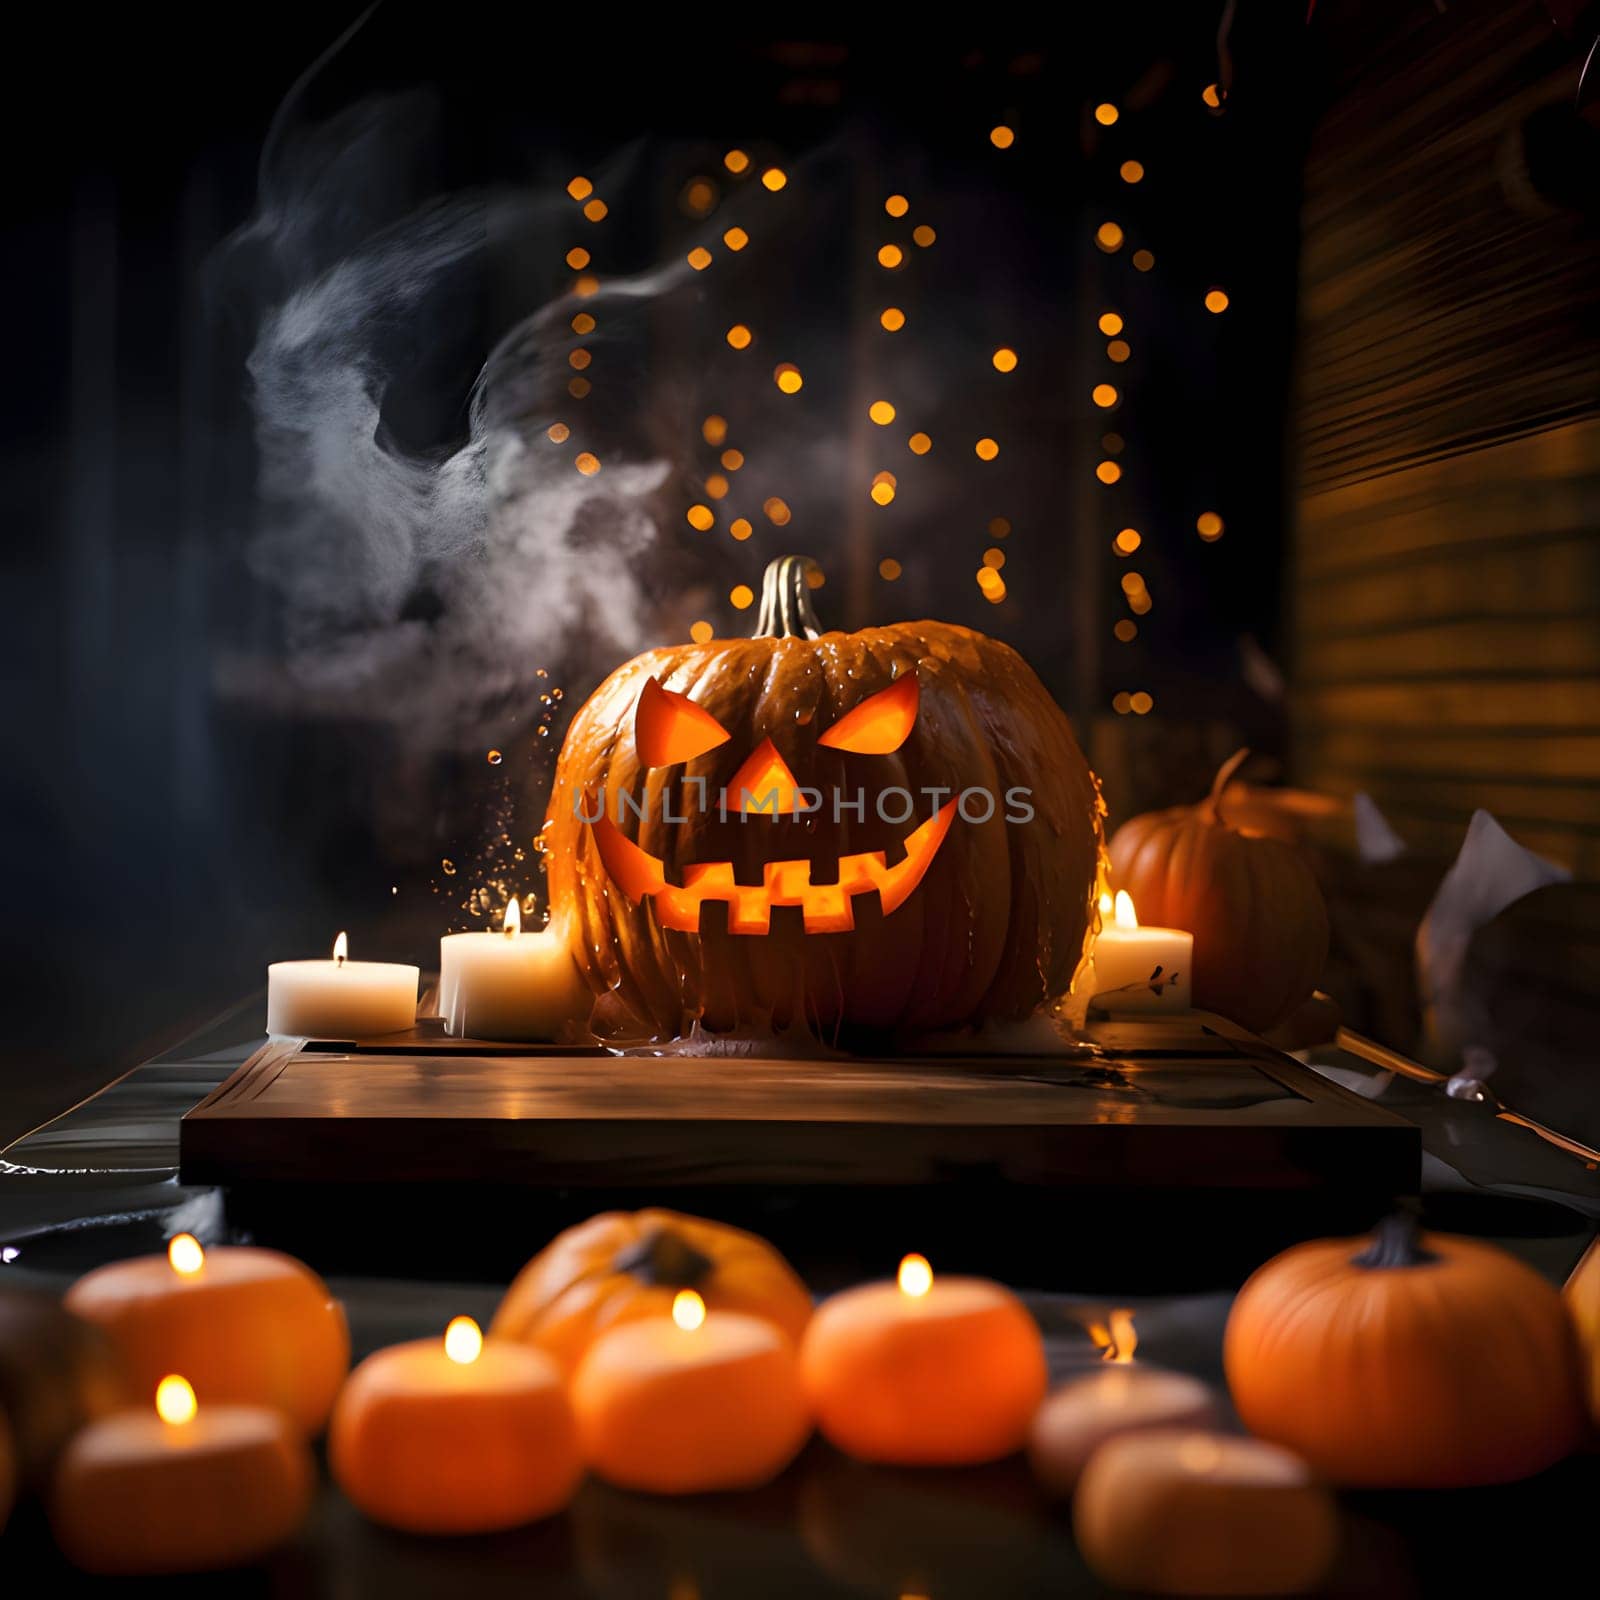 Big glowing jack-o-lantern pumpkin in the background bokeh effect, candles burning in the foreground, a Halloween image. by ThemesS